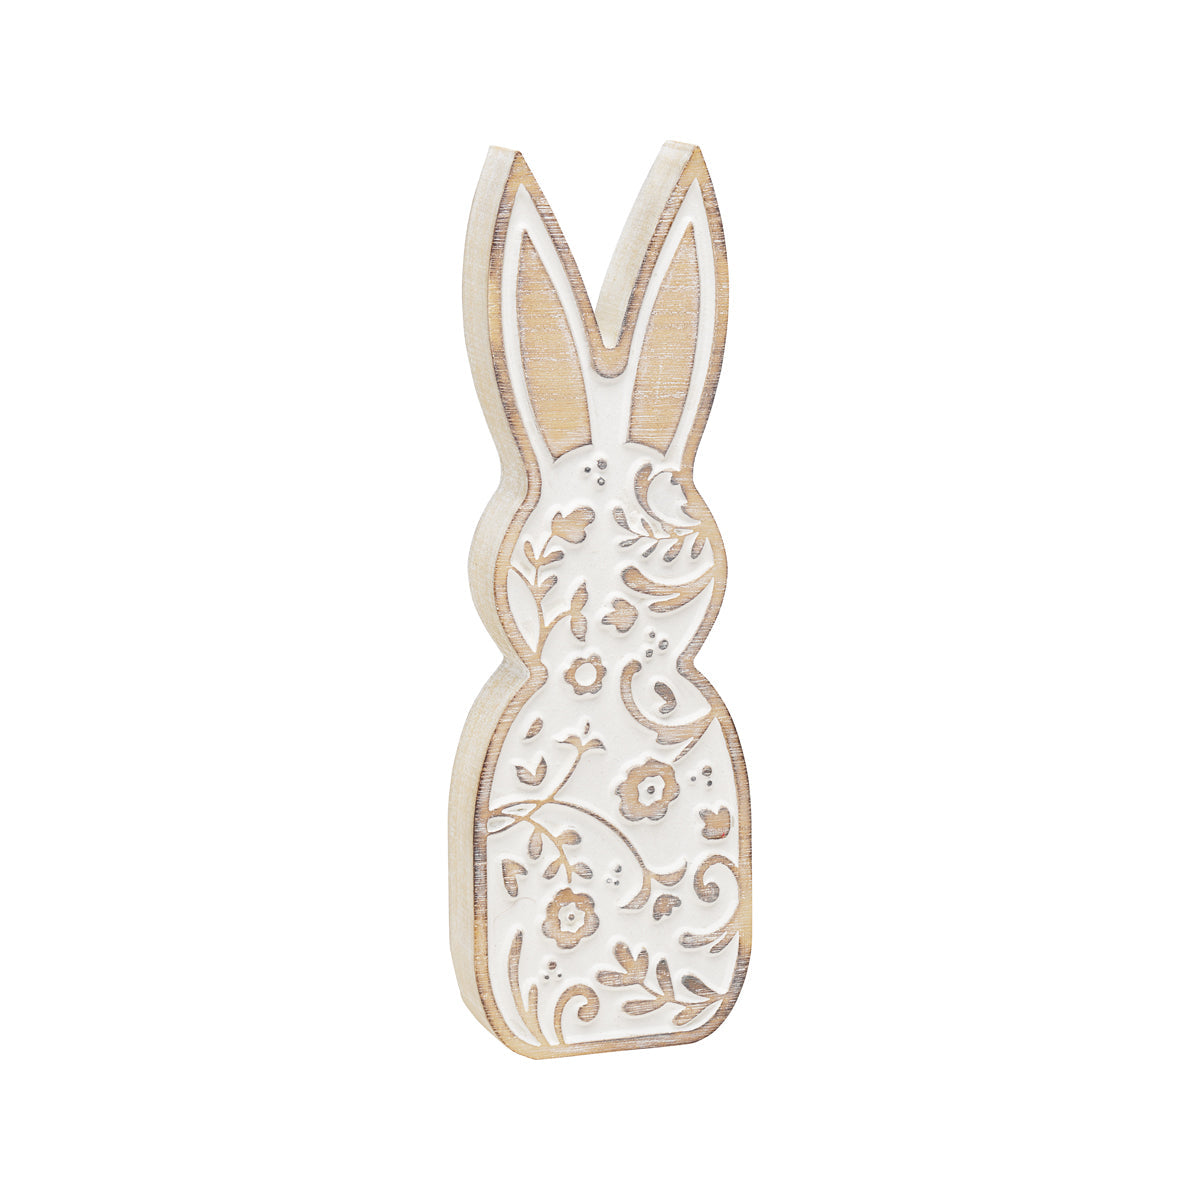 bunny wood cut out pattern